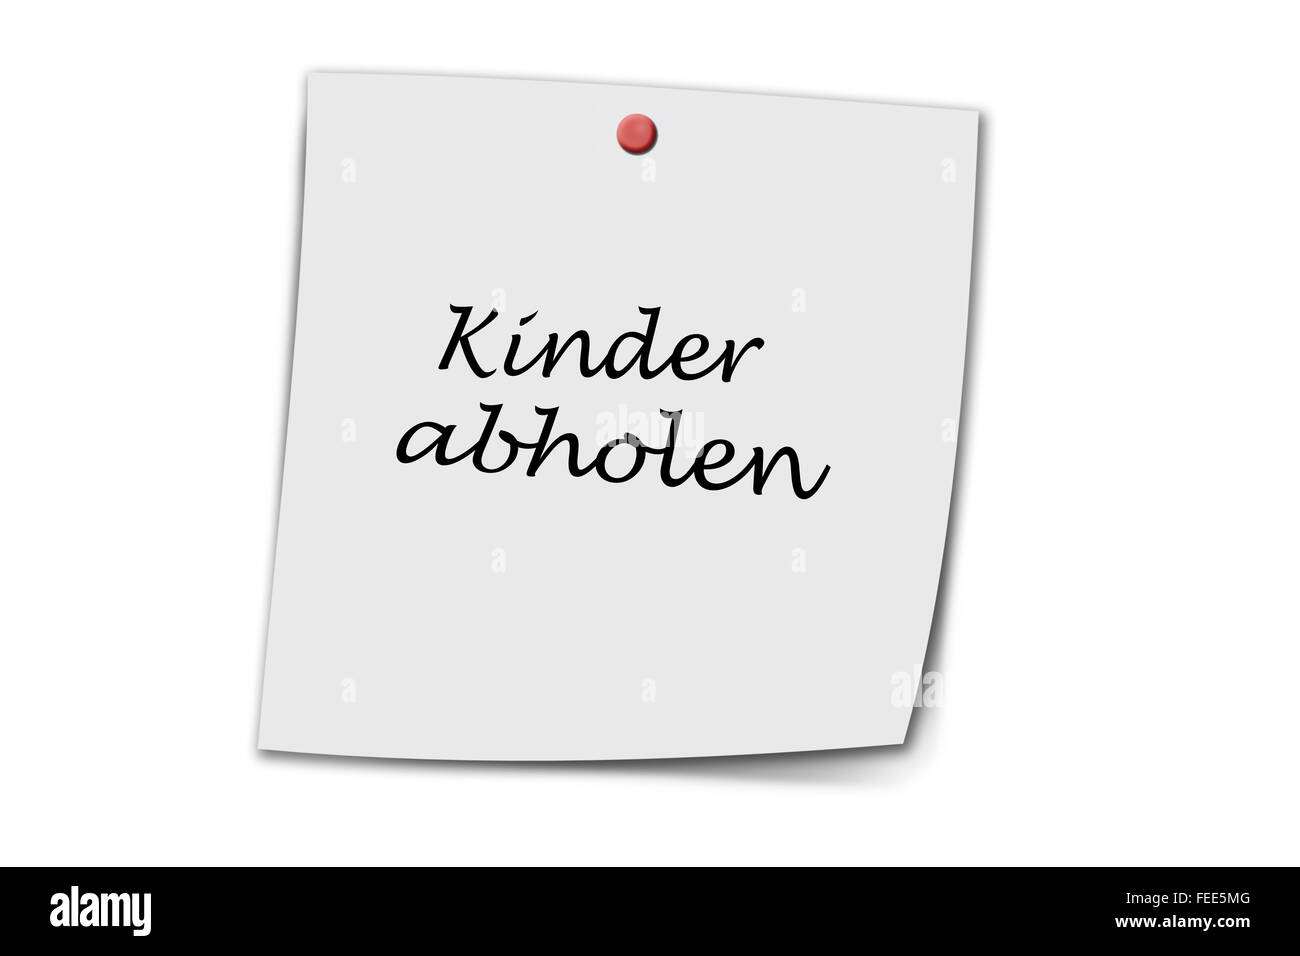 Kinder abholen (German pick up kids) written on a memo isolated on white Stock Photo